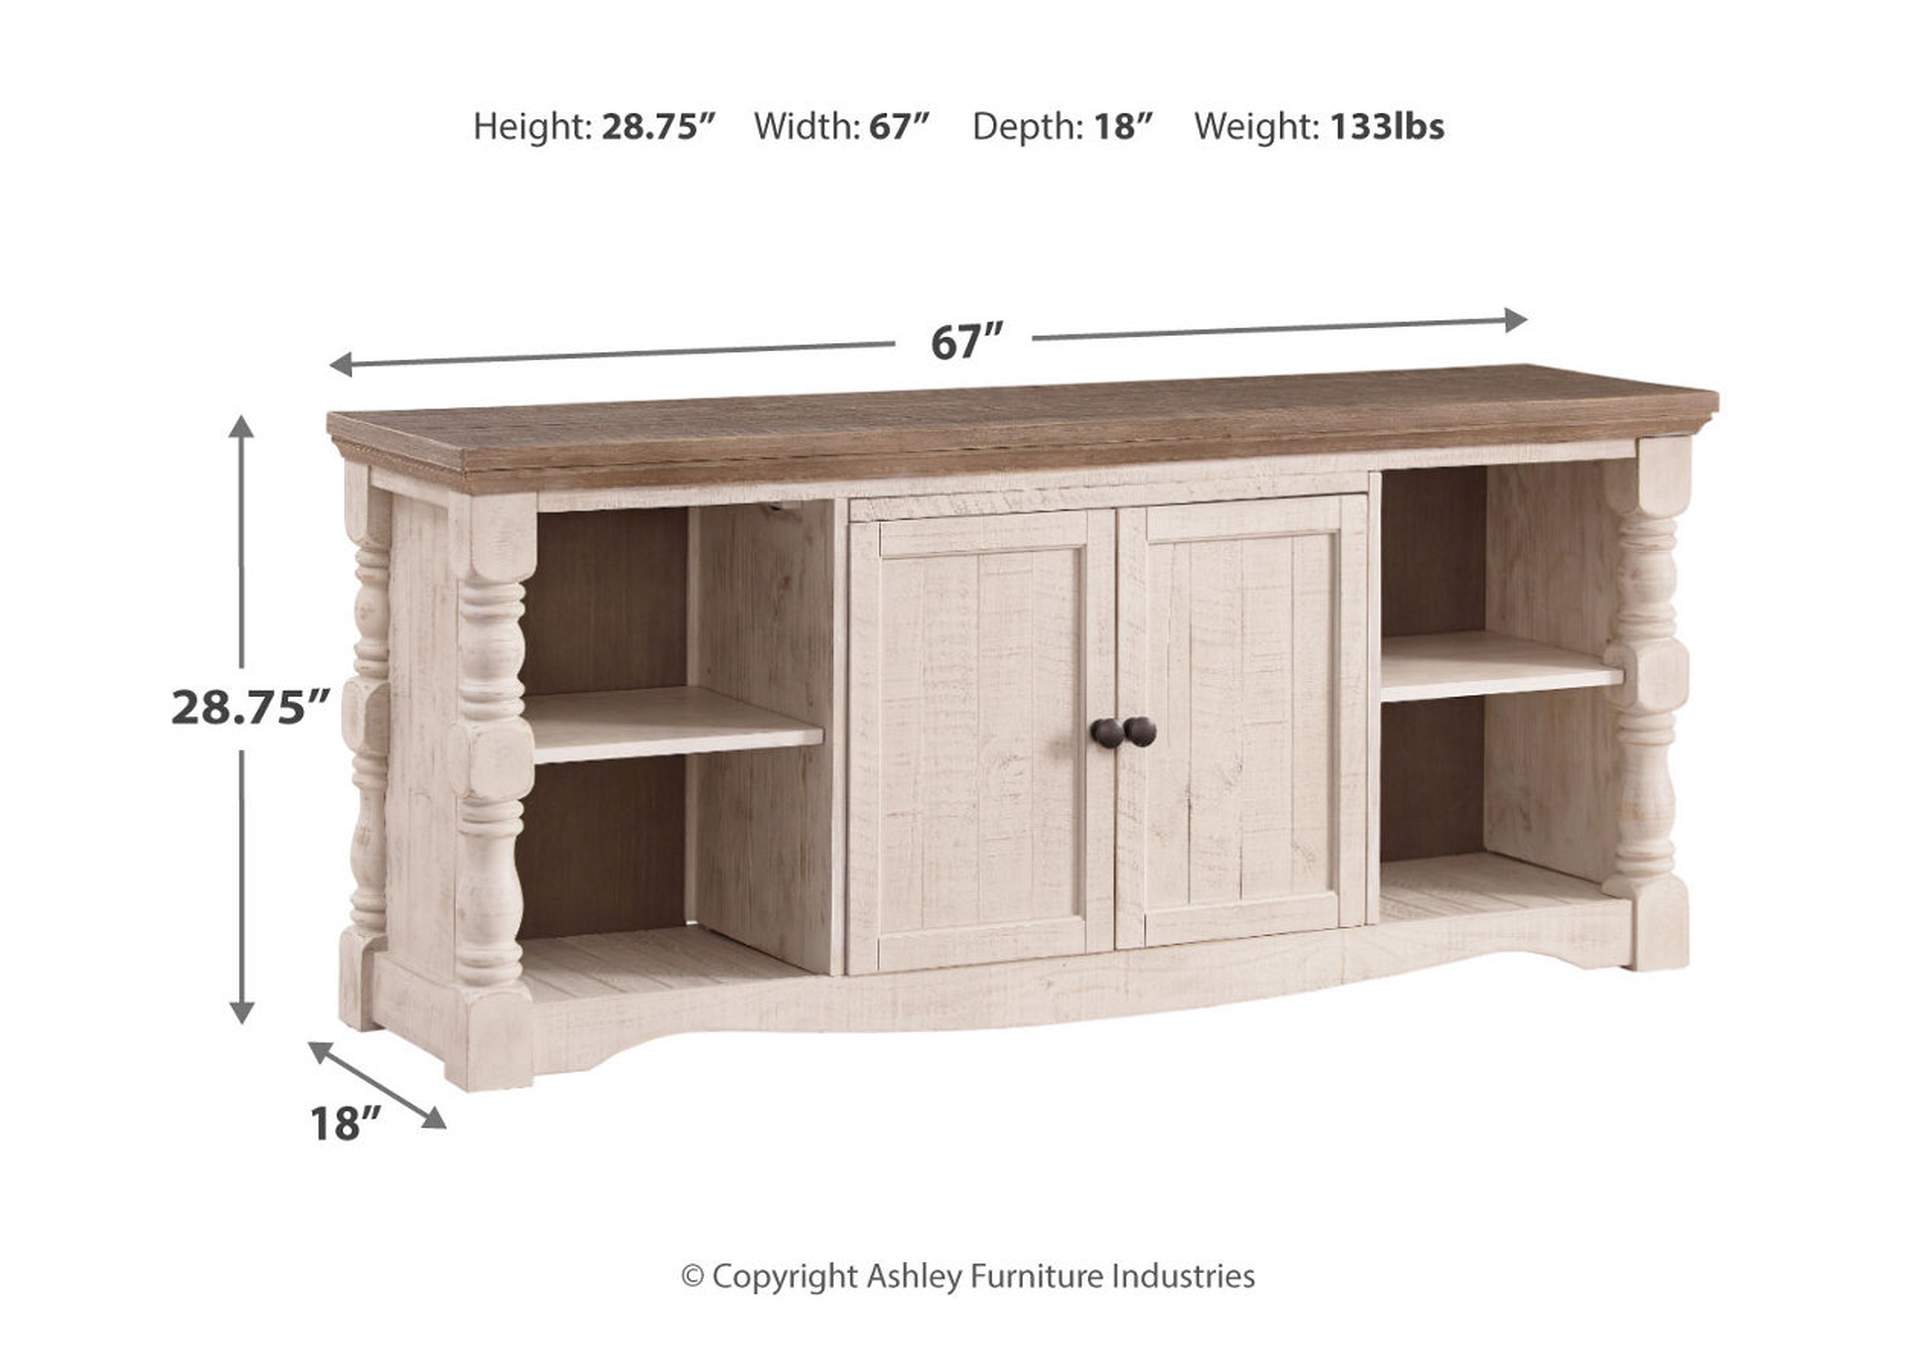 Havalance 67" TV Stand,Direct To Consumer Express